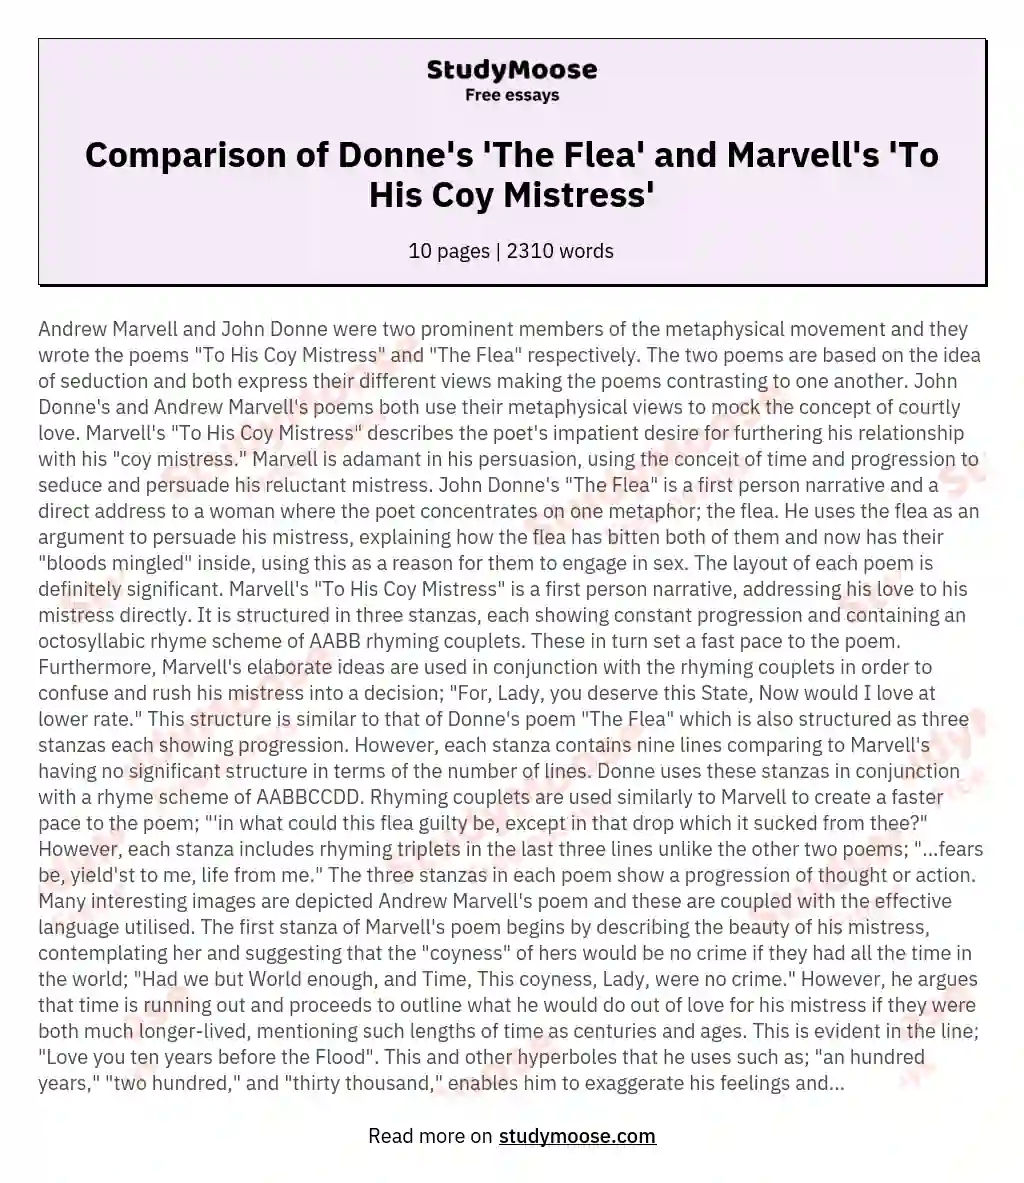 Compare and contrast John Donne's 'The Flea' and Andrew Marvell's 'To His Coy Mistress'; Deciding which you feel is the most seductive